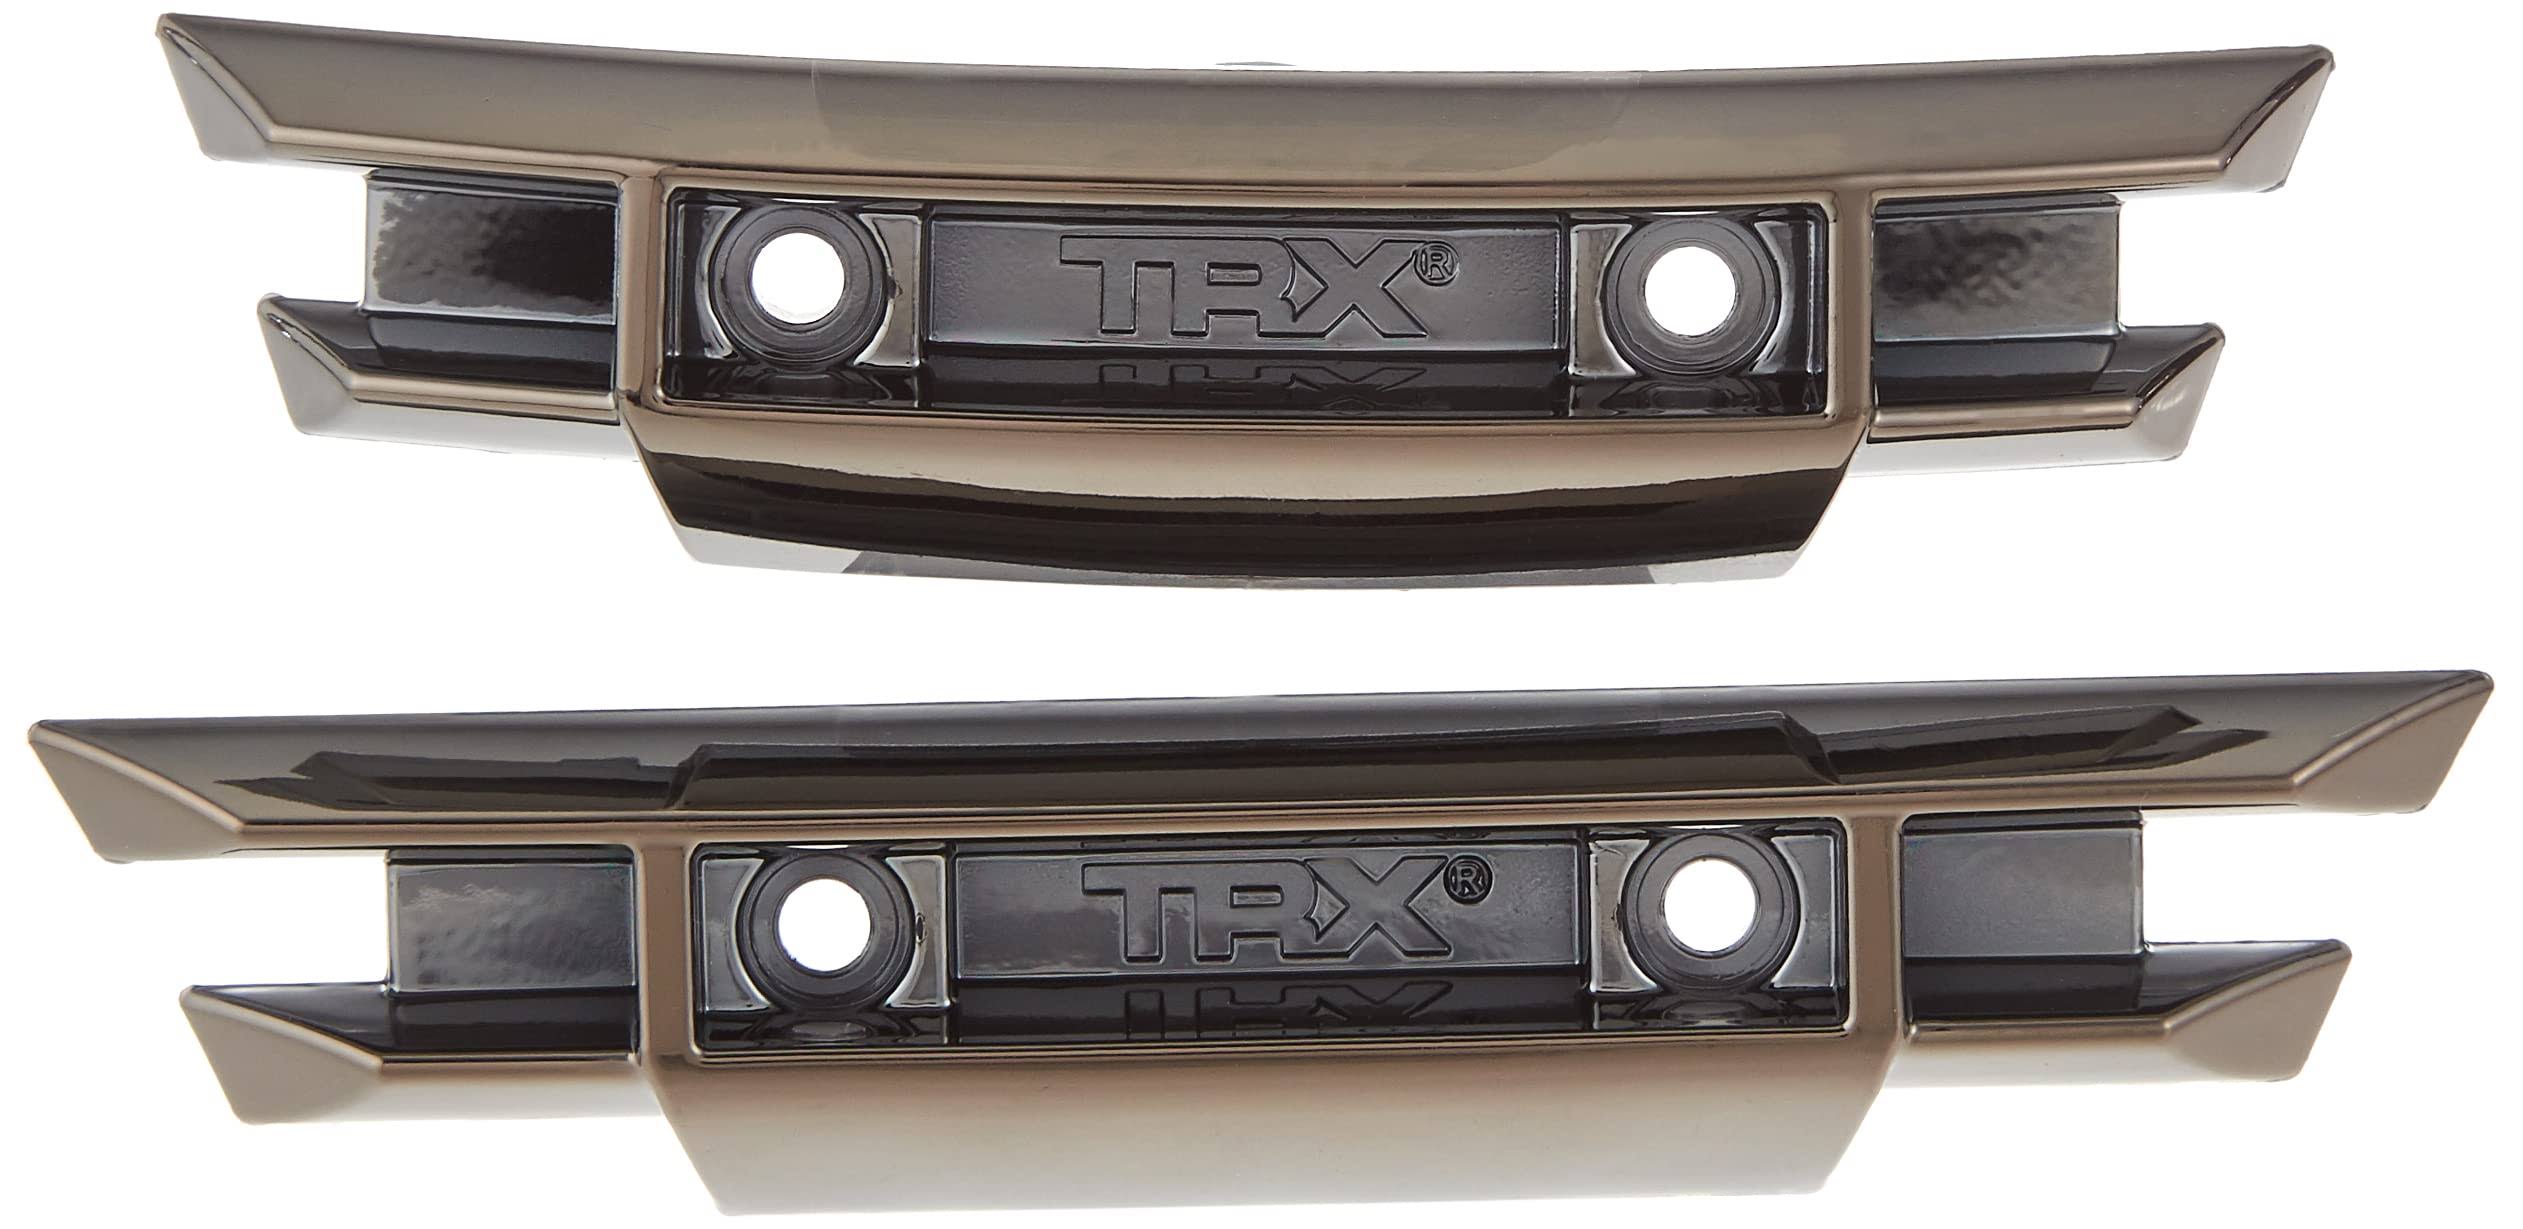 Traxxas Tra5335x Front And Rear Bumpers - Chrome